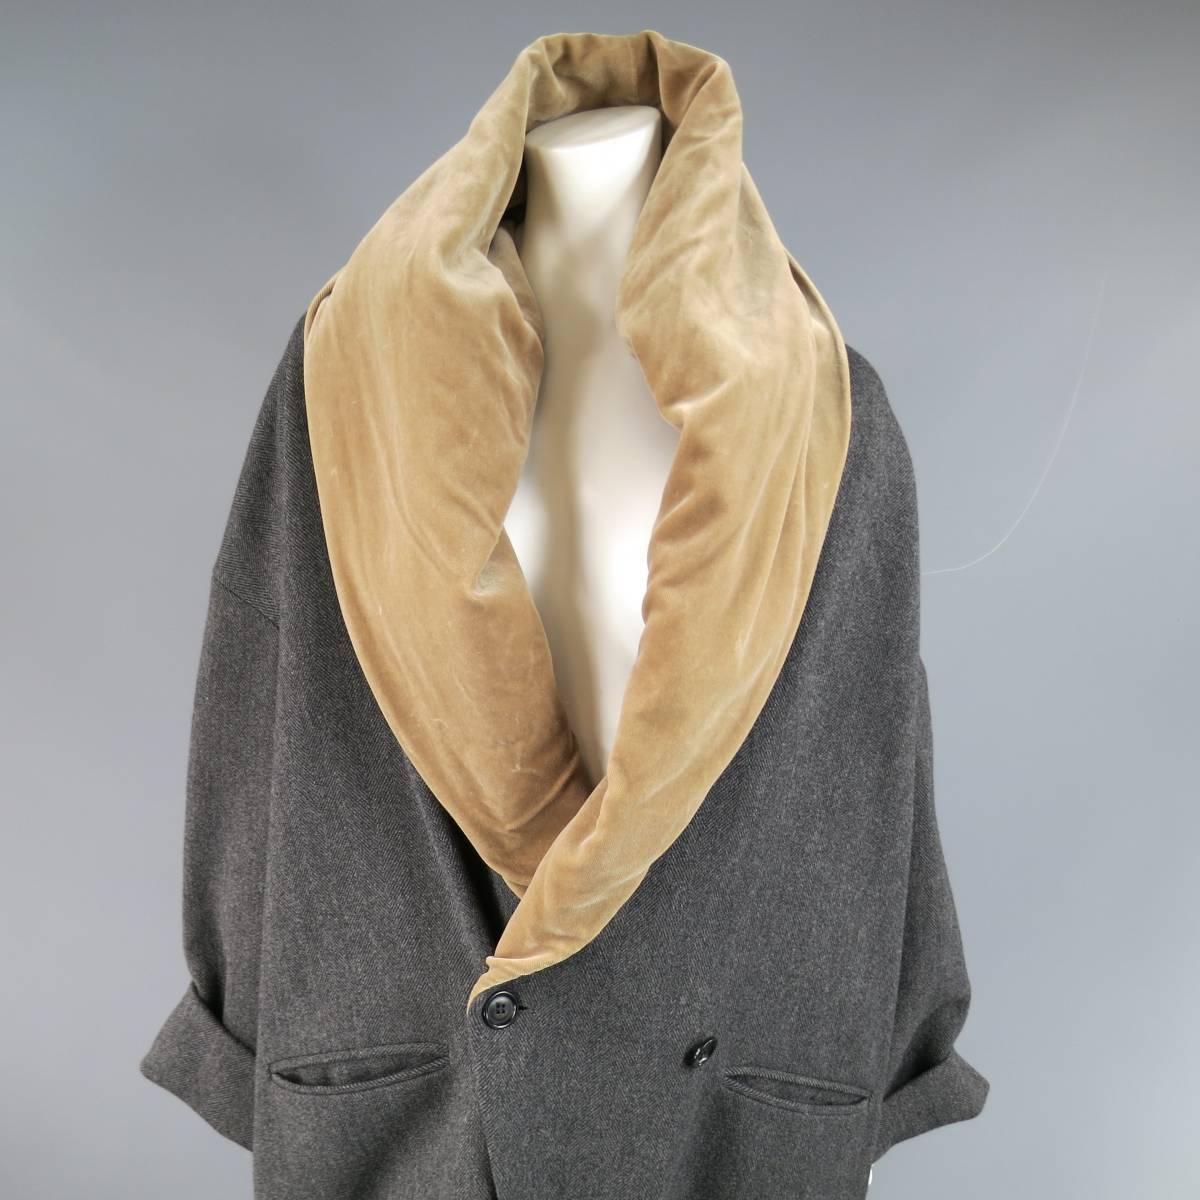 This chic vintage ROMEO GIGLI oversized cacoon coat comes in a gray herringbone wool blend and features a two button double breasted closure, drop shoulder cuffed sleeves, and deep V neckline with tan velvet shawl collar. Some wear on velvet. Made